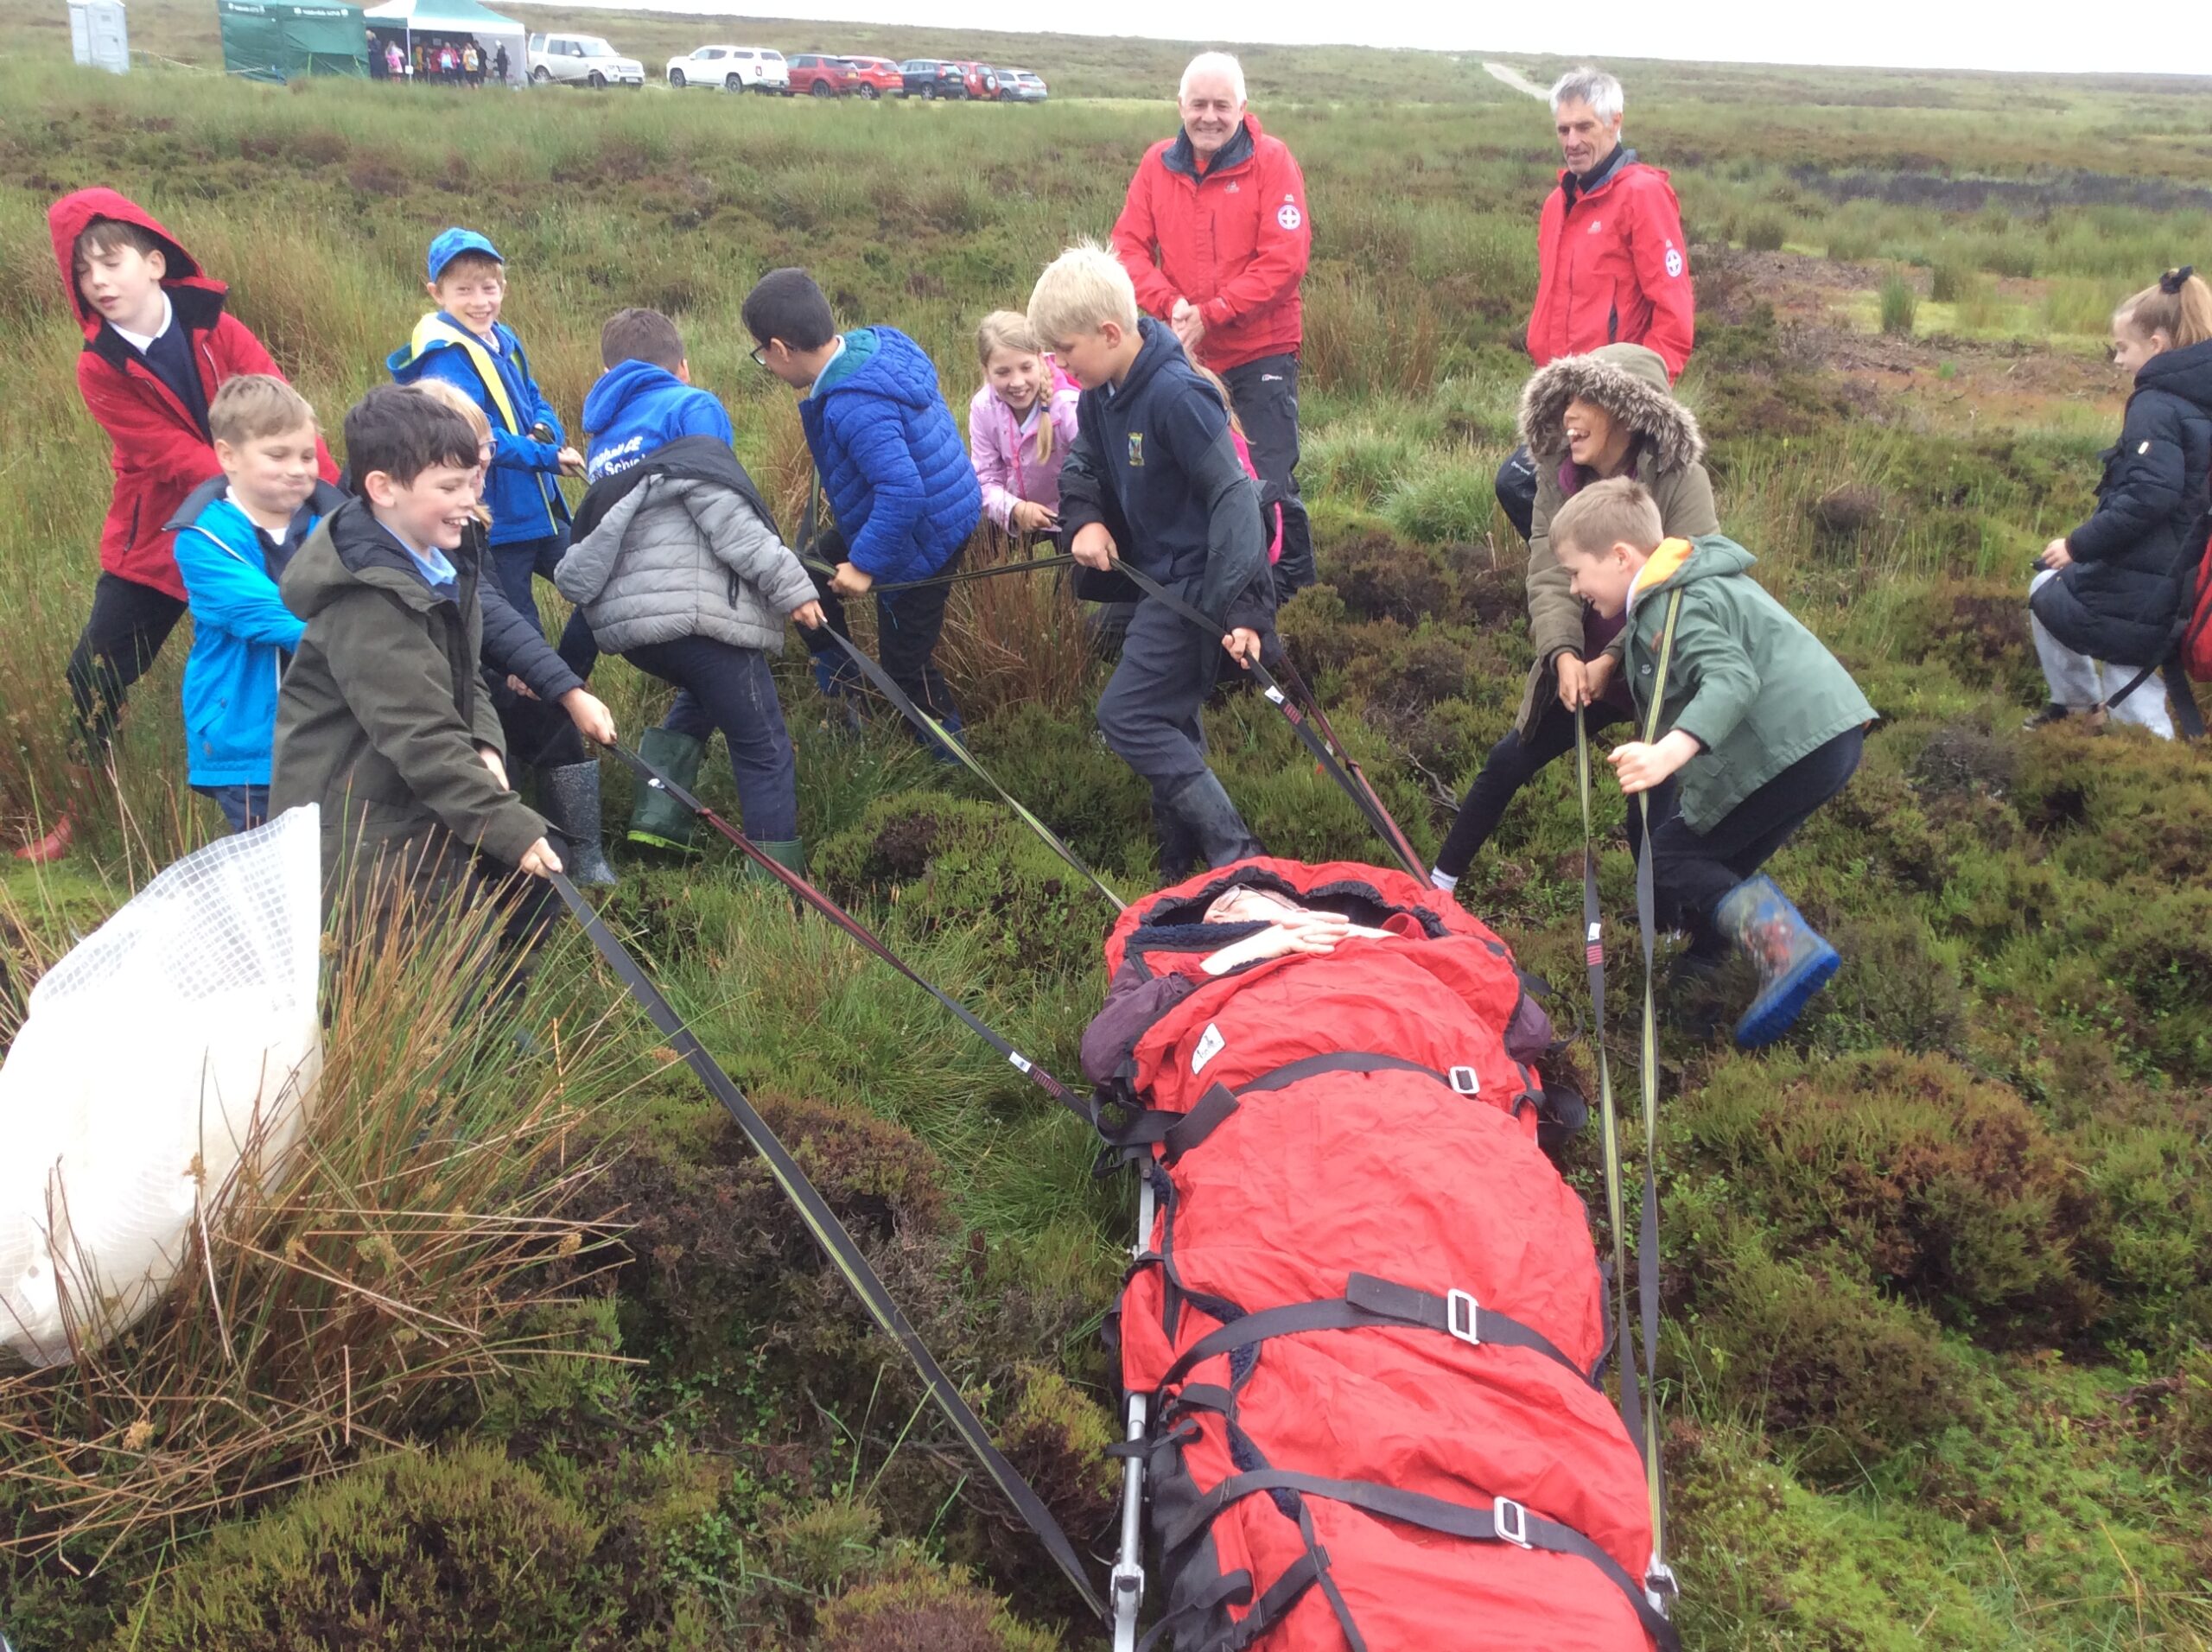 School children hauling a teacher to practice rescuing while on a school trip with Killinghall C.E